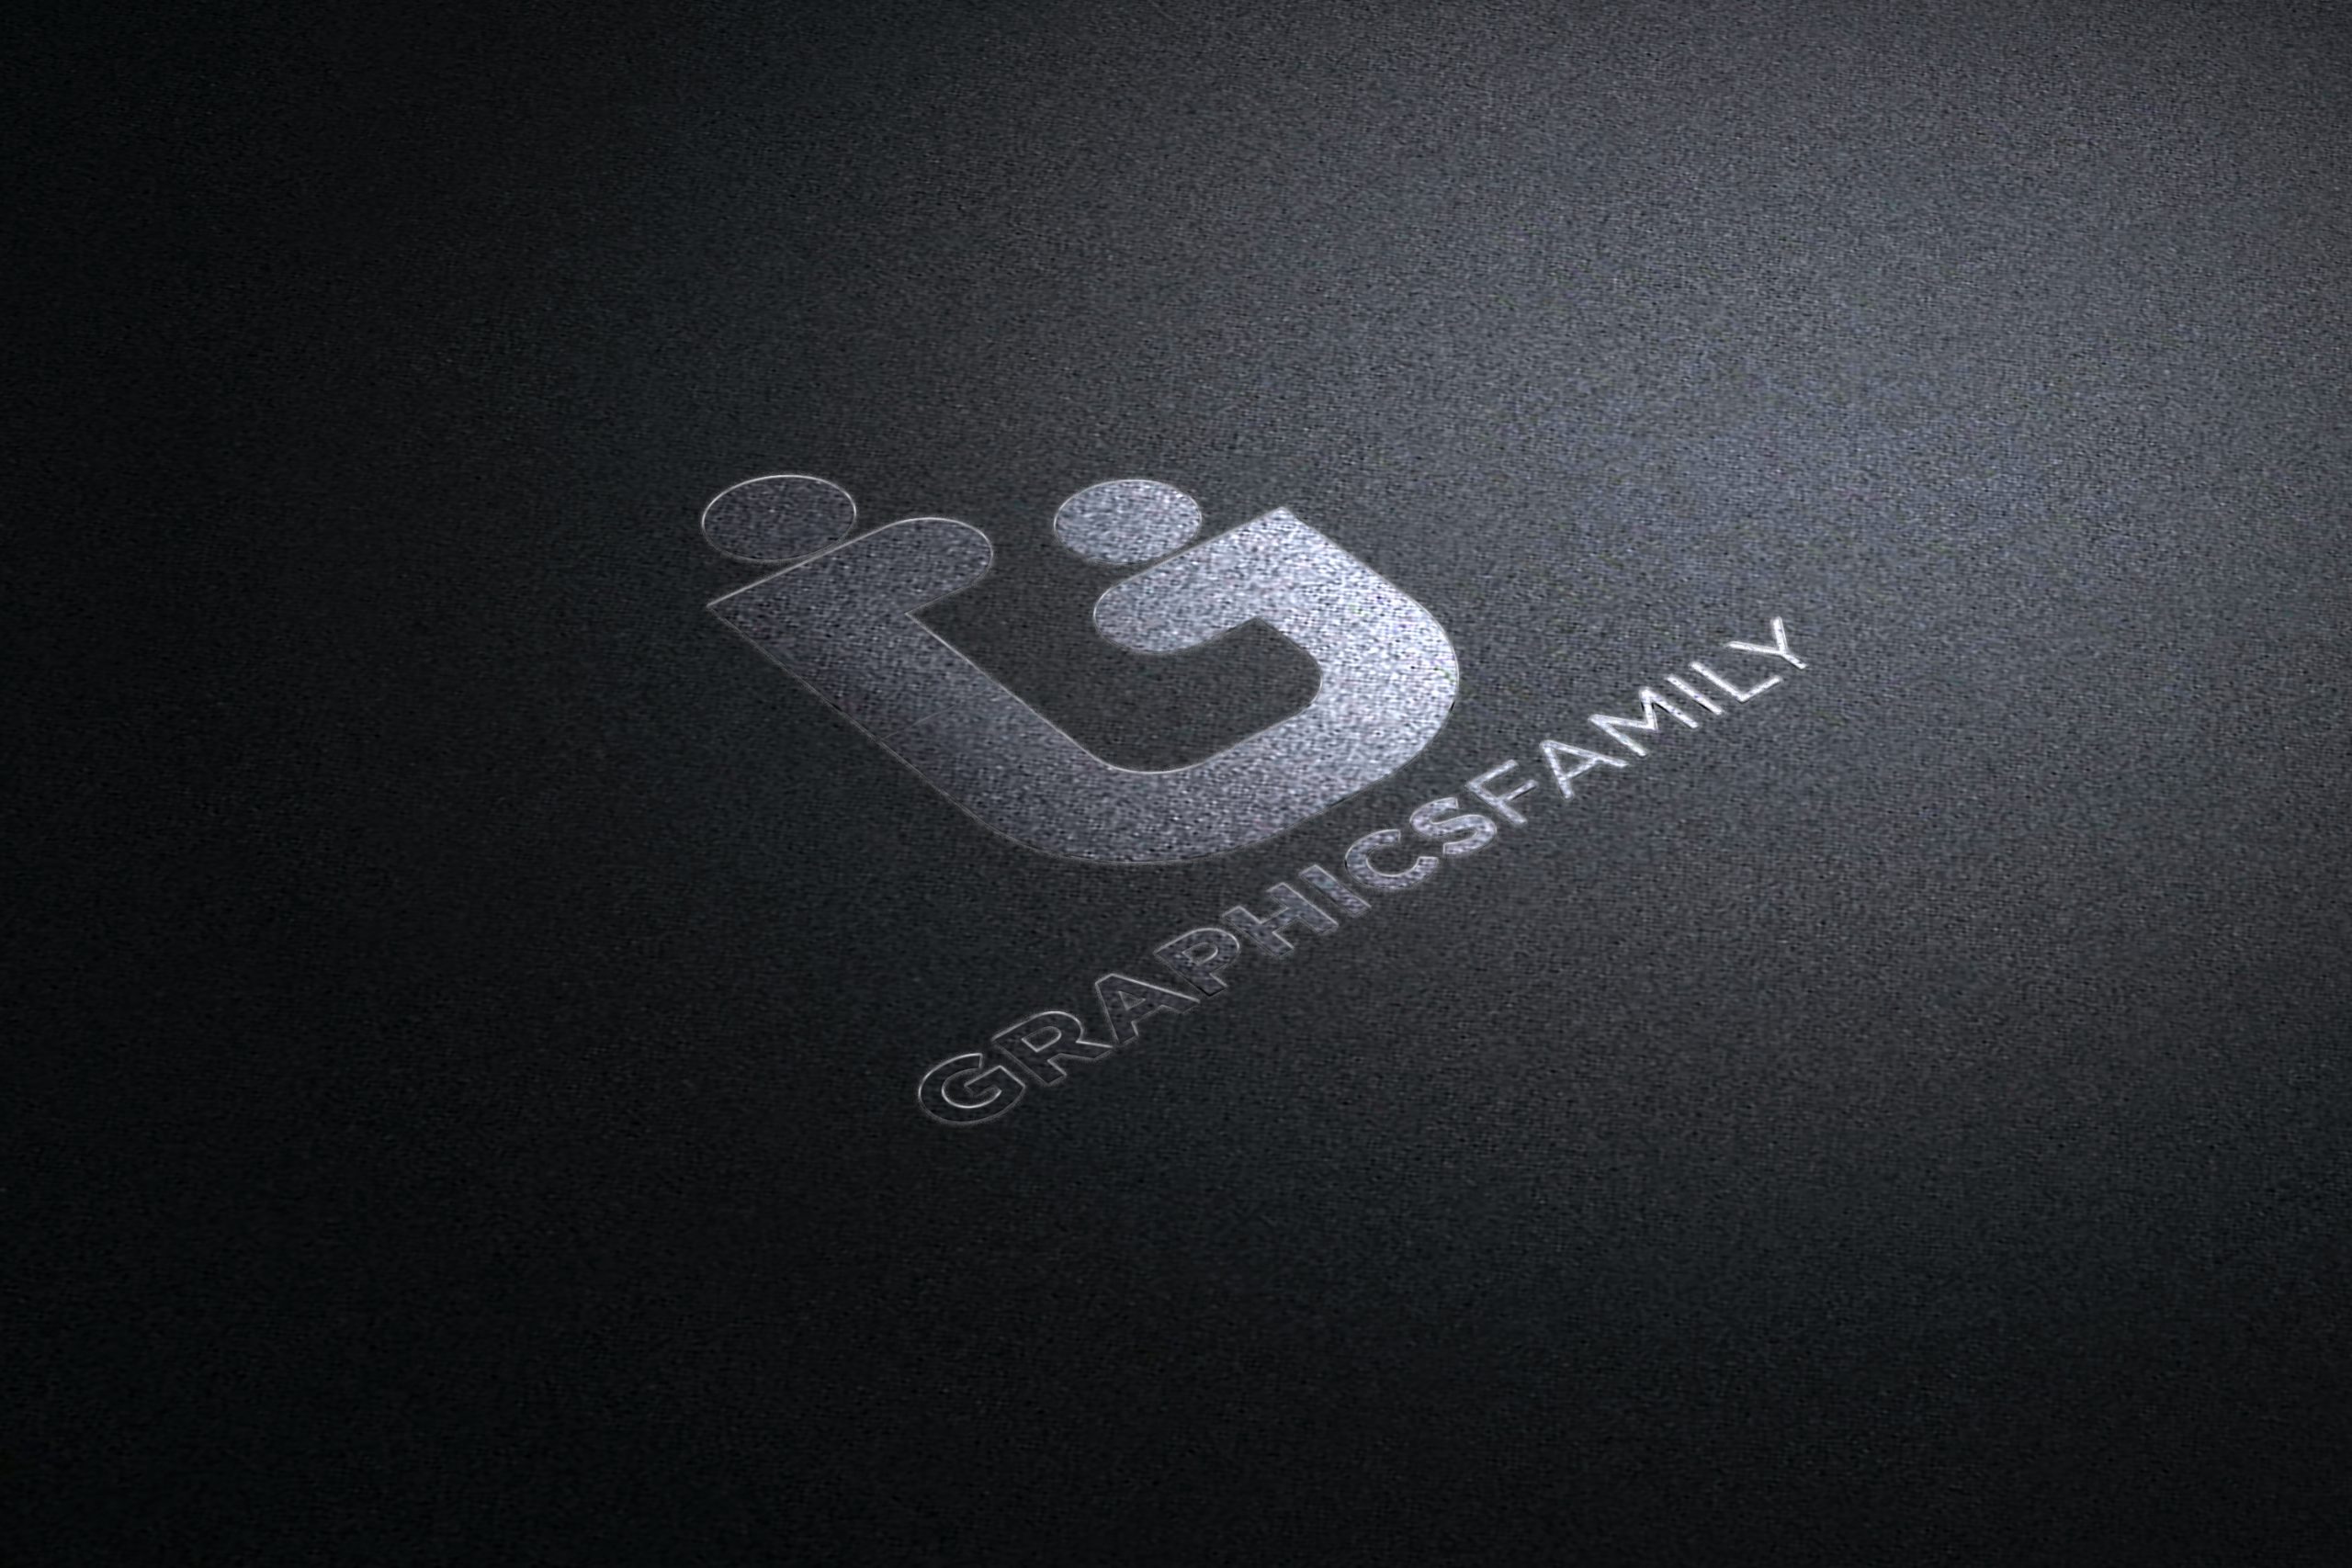 Logo Mockup on Black Background Texture by GraphicsFamily